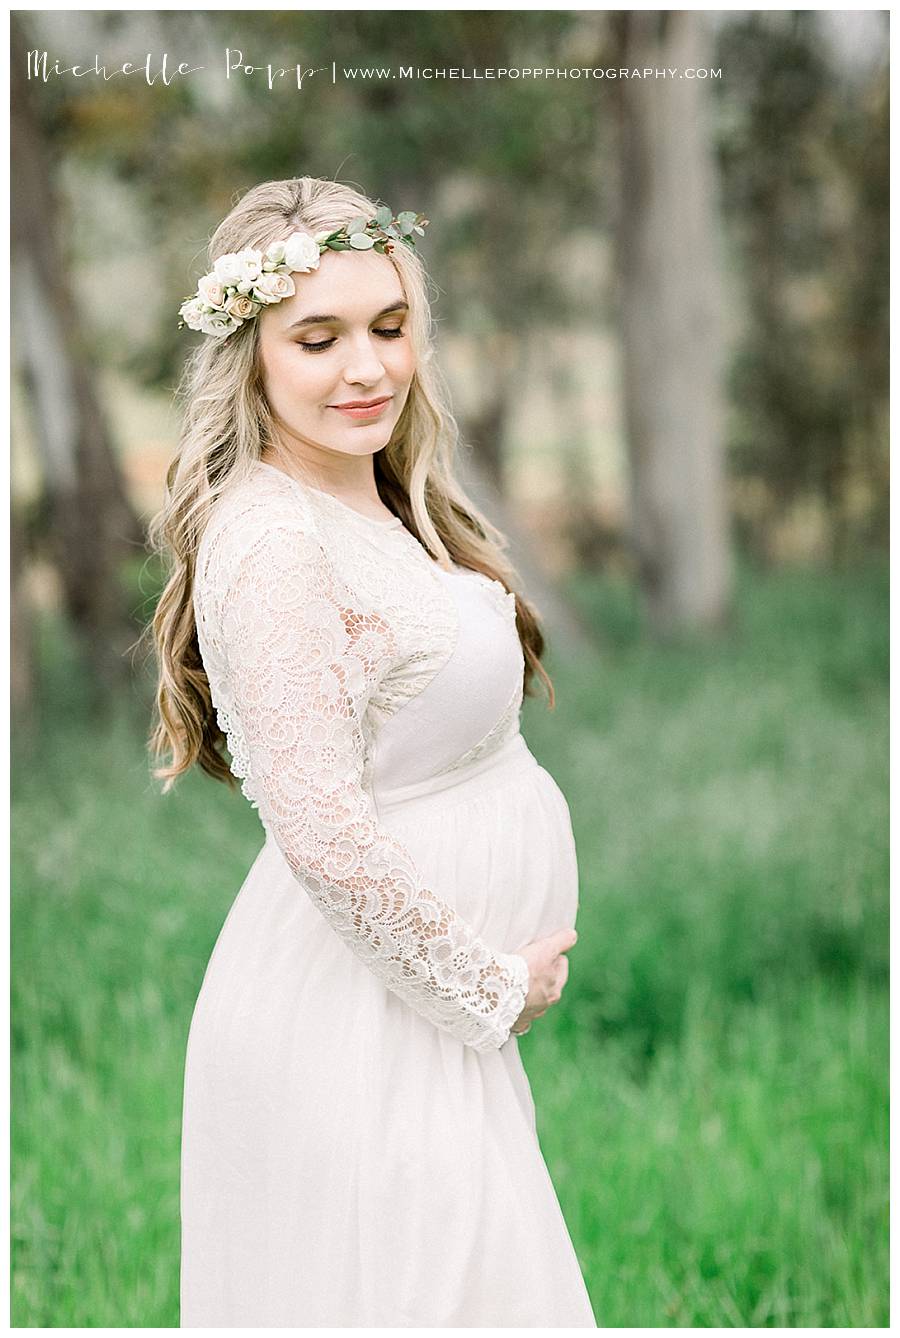 Spring Maternity Photos with Michelle Popp Photography